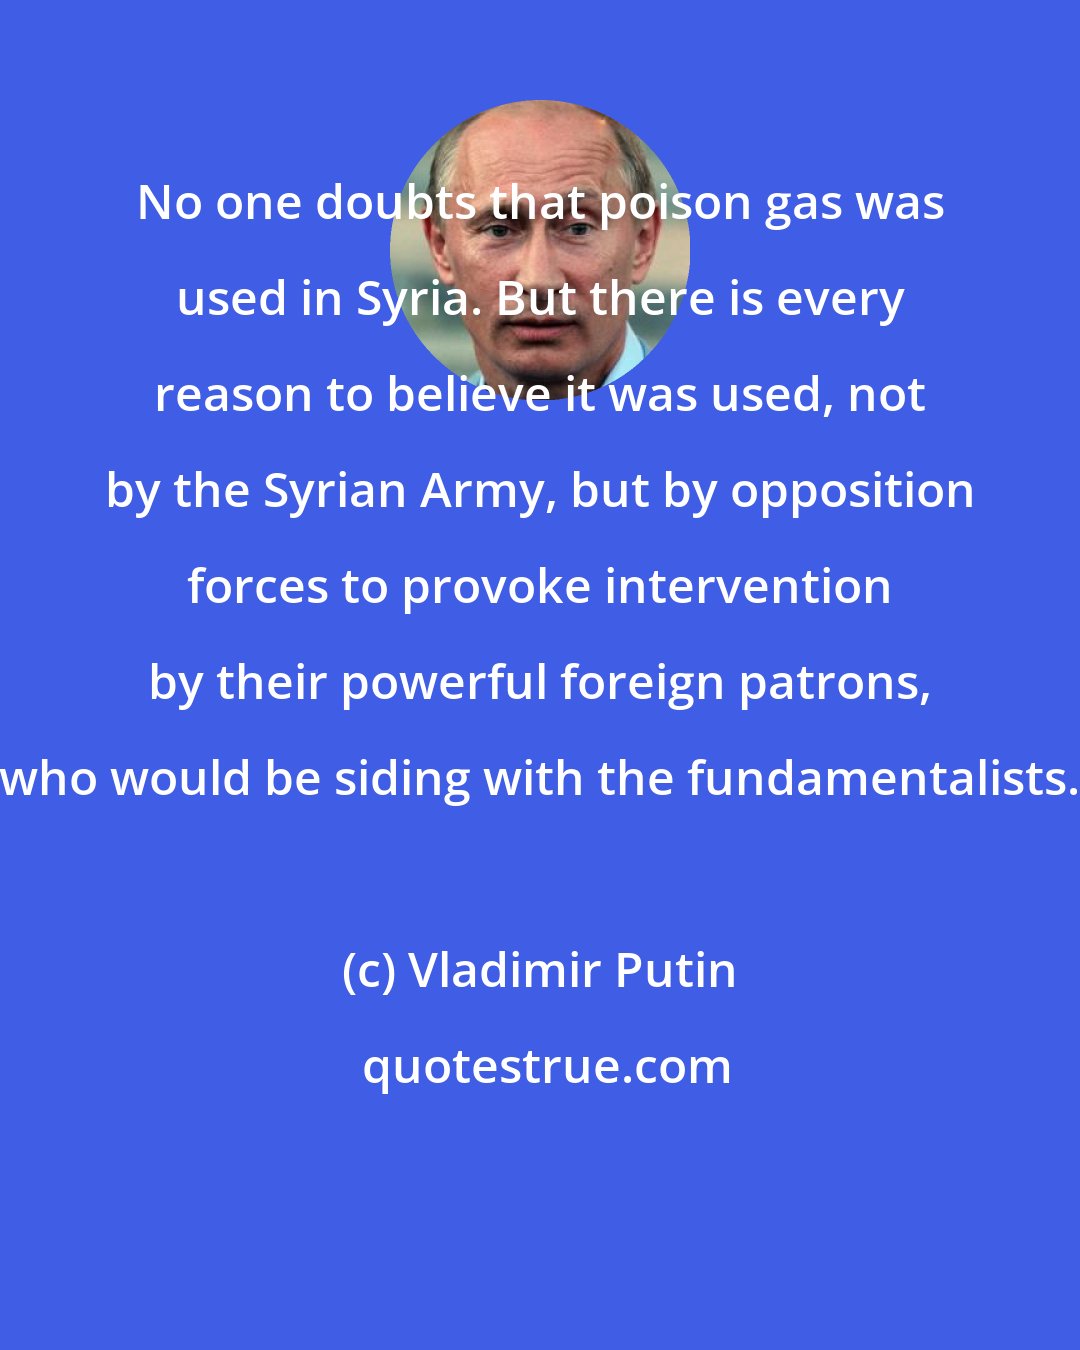 Vladimir Putin: No one doubts that poison gas was used in Syria. But there is every reason to believe it was used, not by the Syrian Army, but by opposition forces to provoke intervention by their powerful foreign patrons, who would be siding with the fundamentalists.